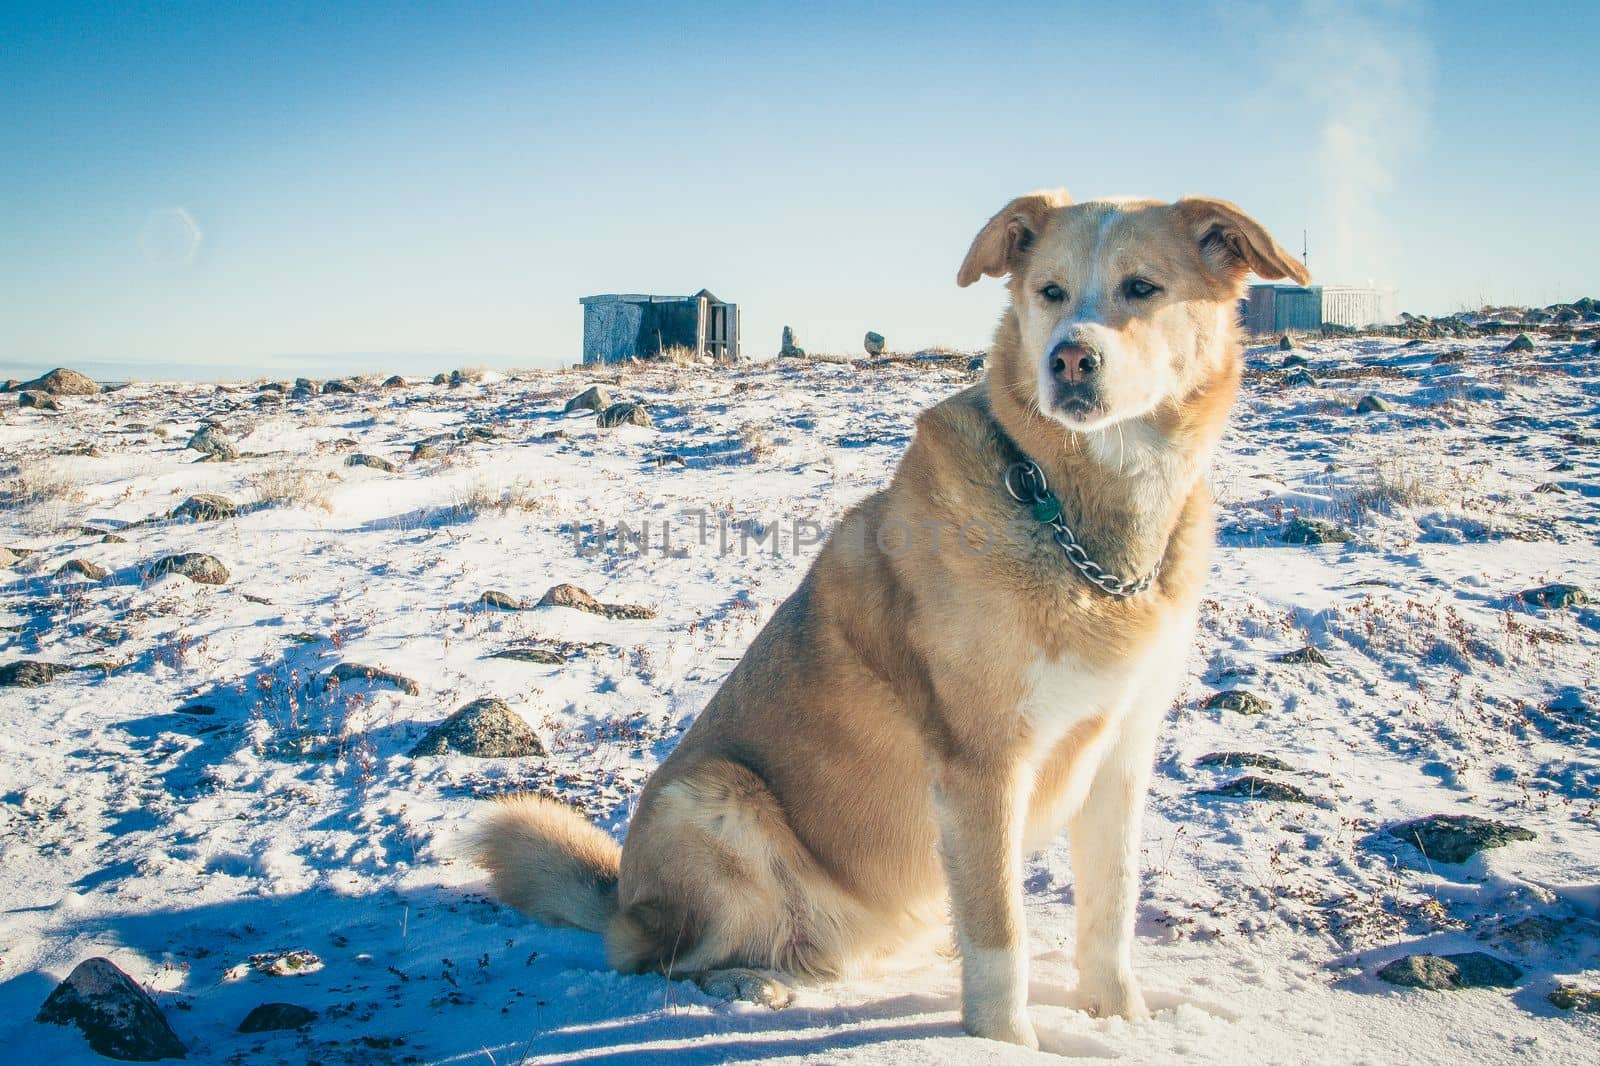 Close-up of a yellow Labrador dog staring with a snowy arctic landscape in the background, near Arviat, Nunavut Canada